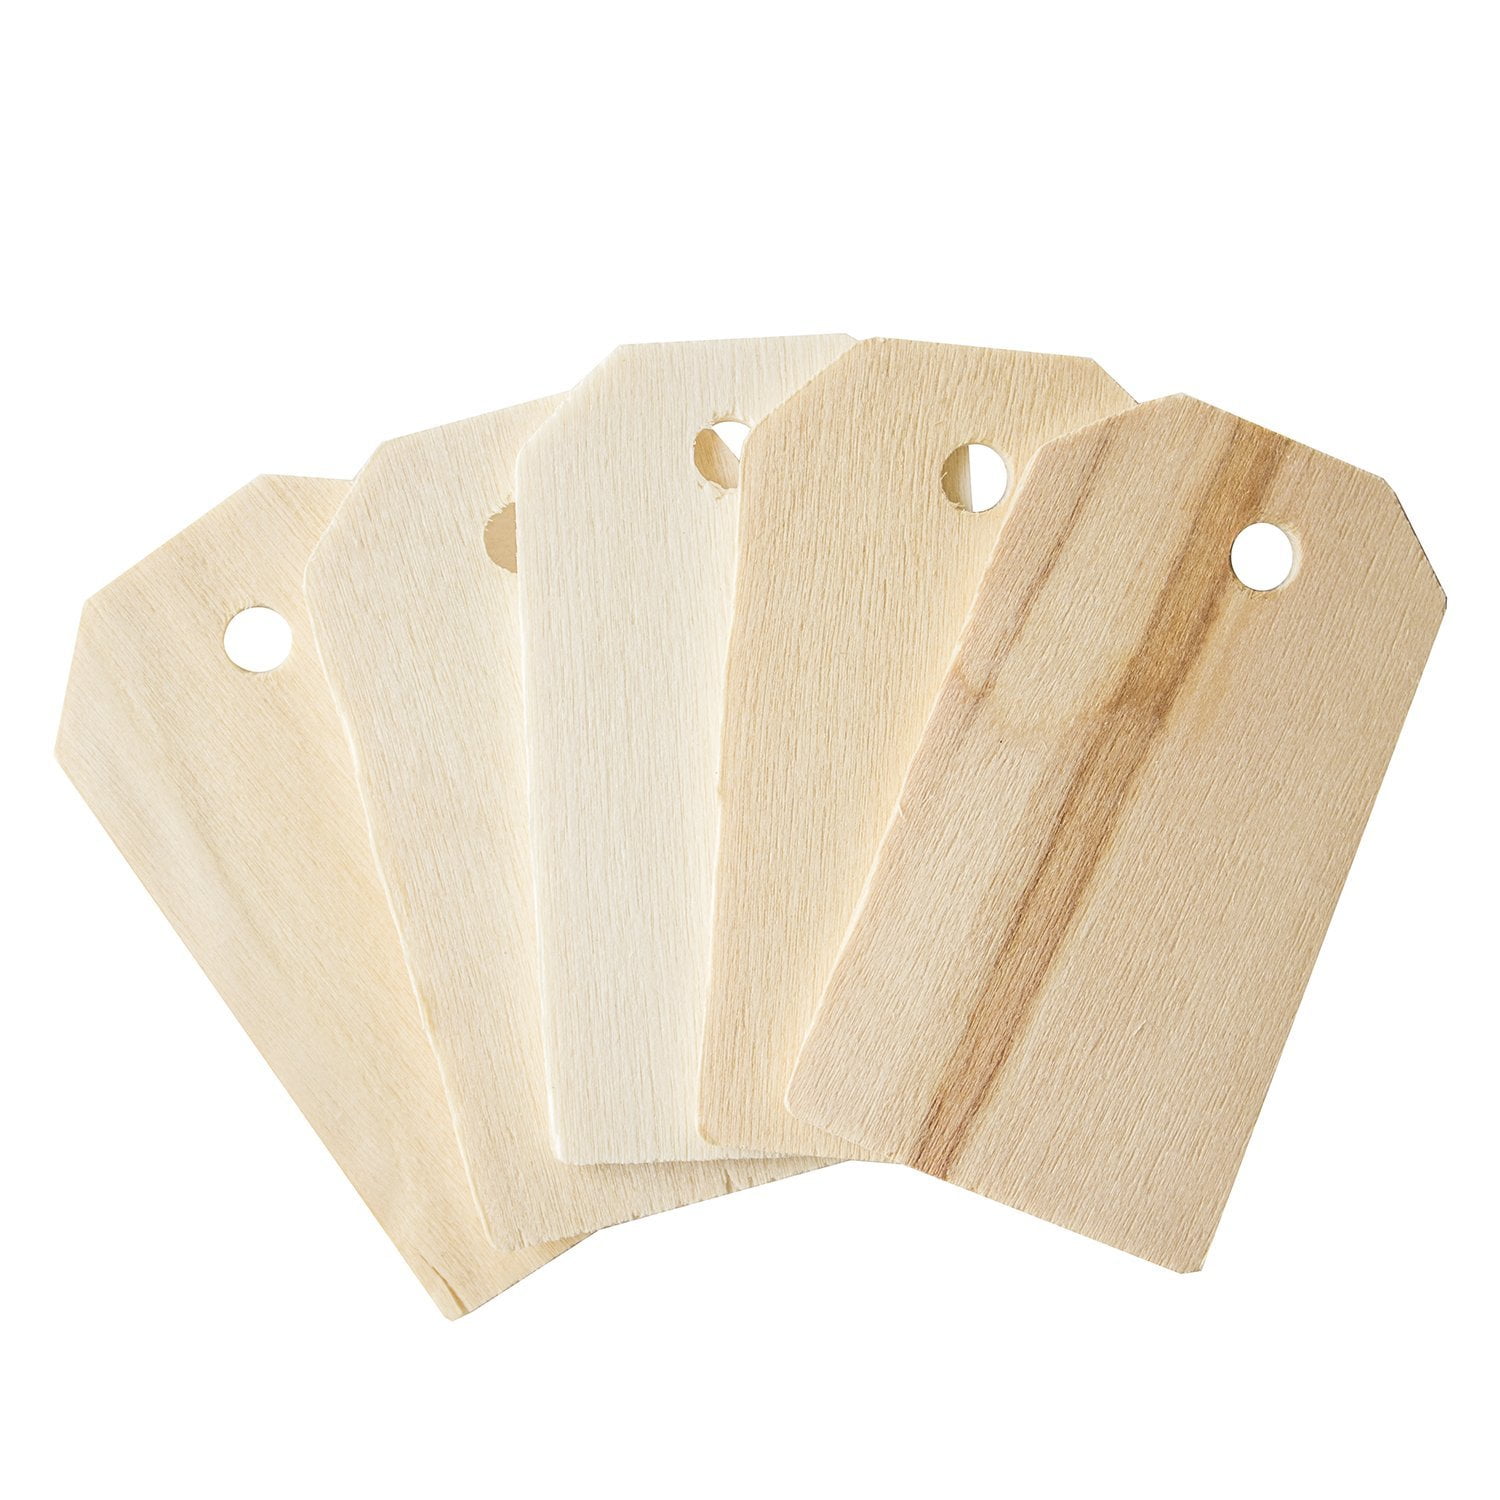 TSB2 wooden birch ply luggage tags labels hangers gift tag craft shapes blanks 